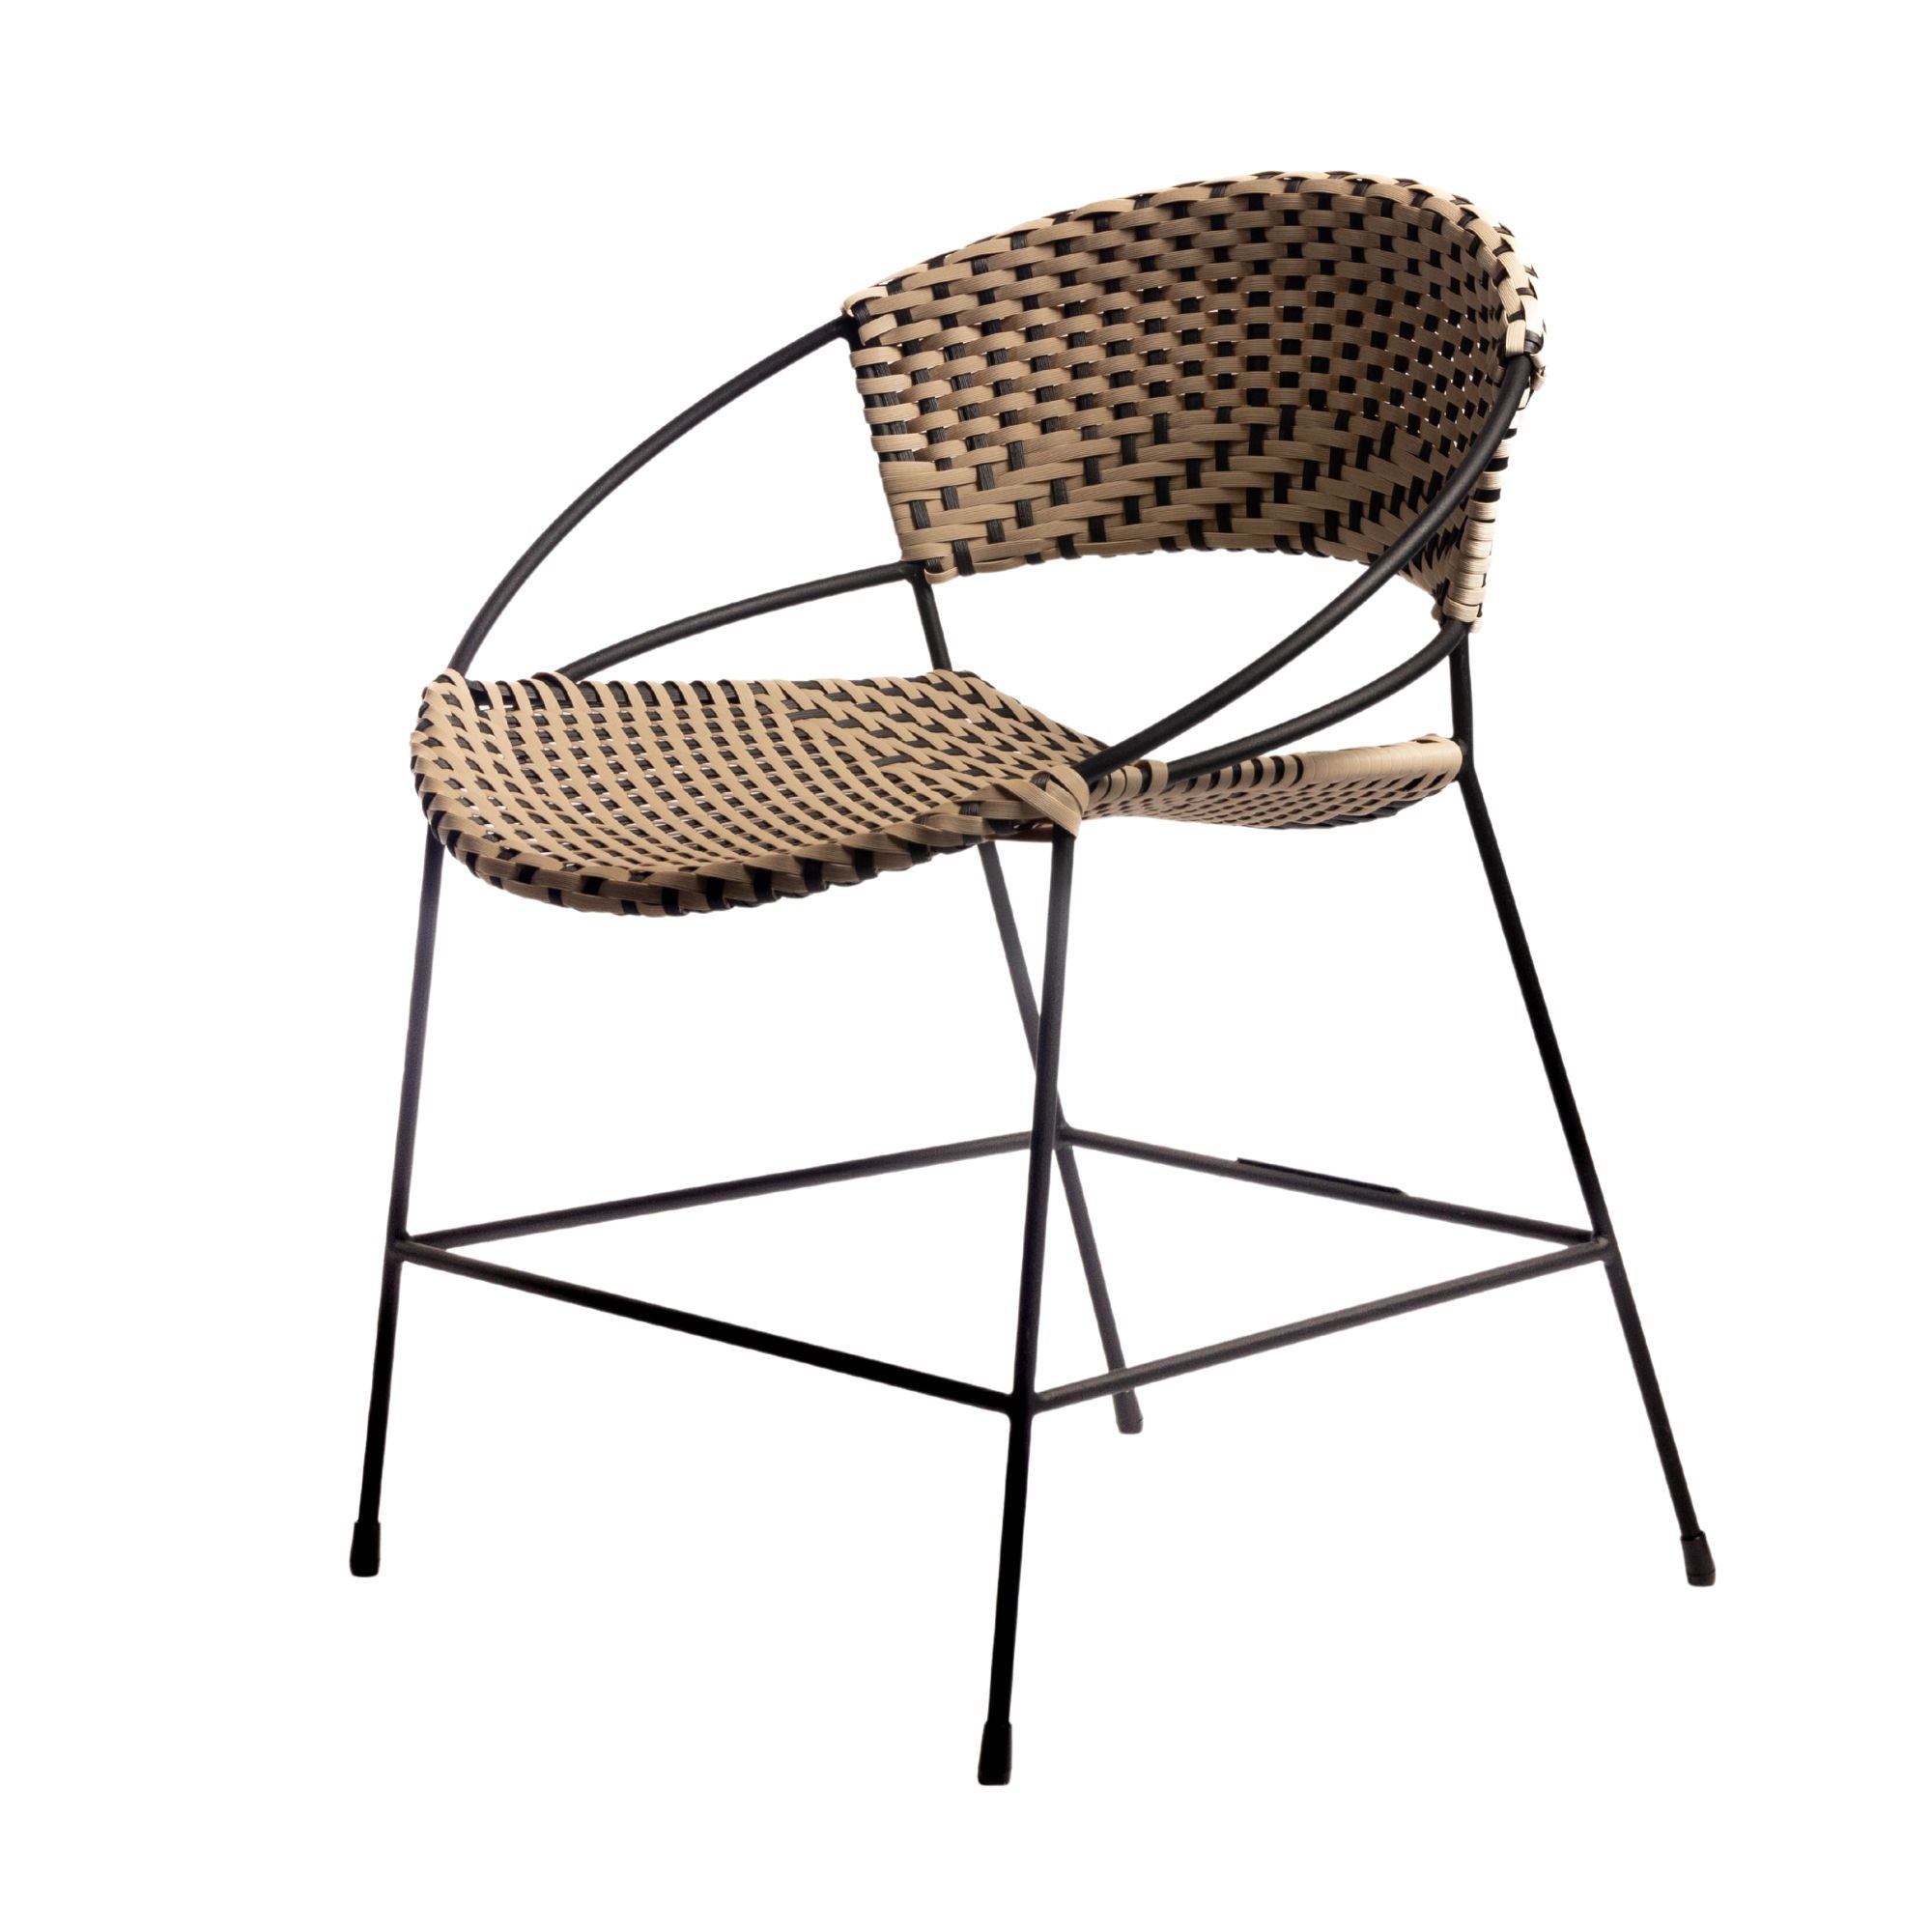 Woven Outdoor Dining Chair - Chobe